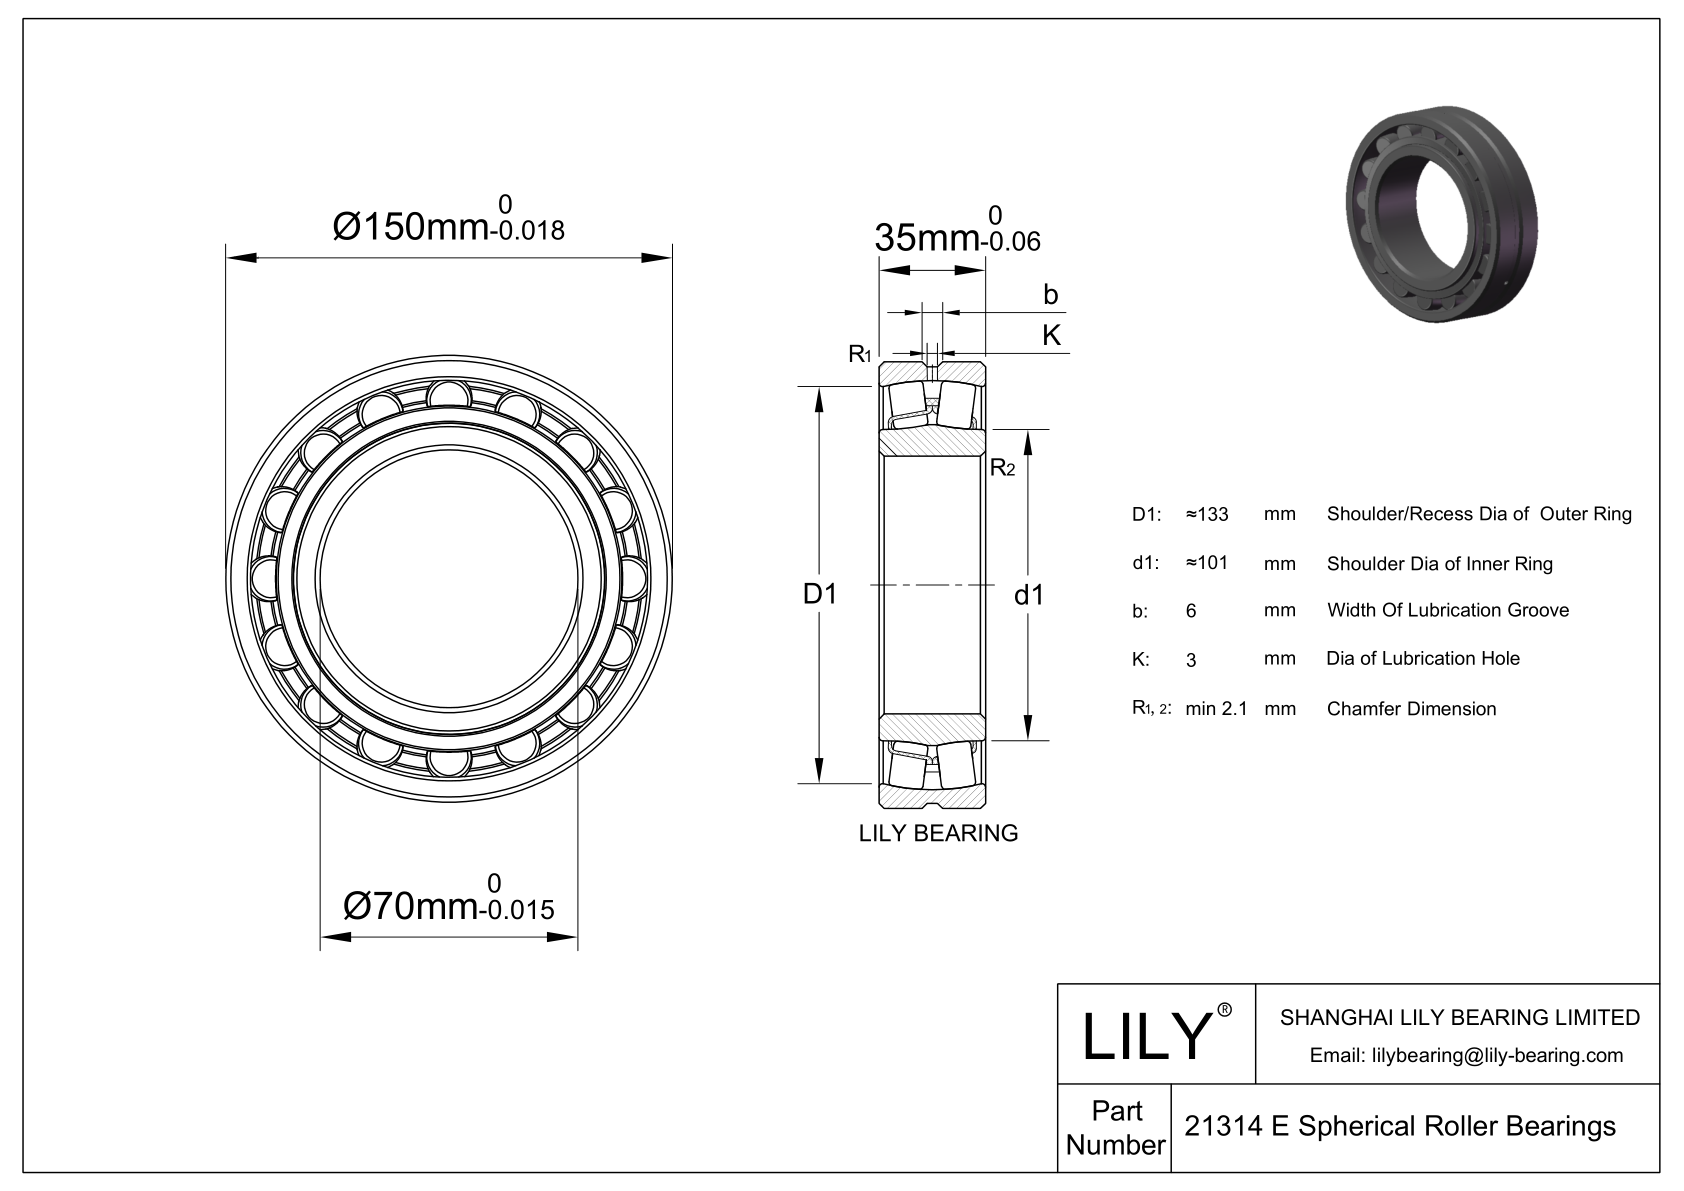 21314 E | Double Row Spherical Roller Bearing - SKF | Lily Bearing